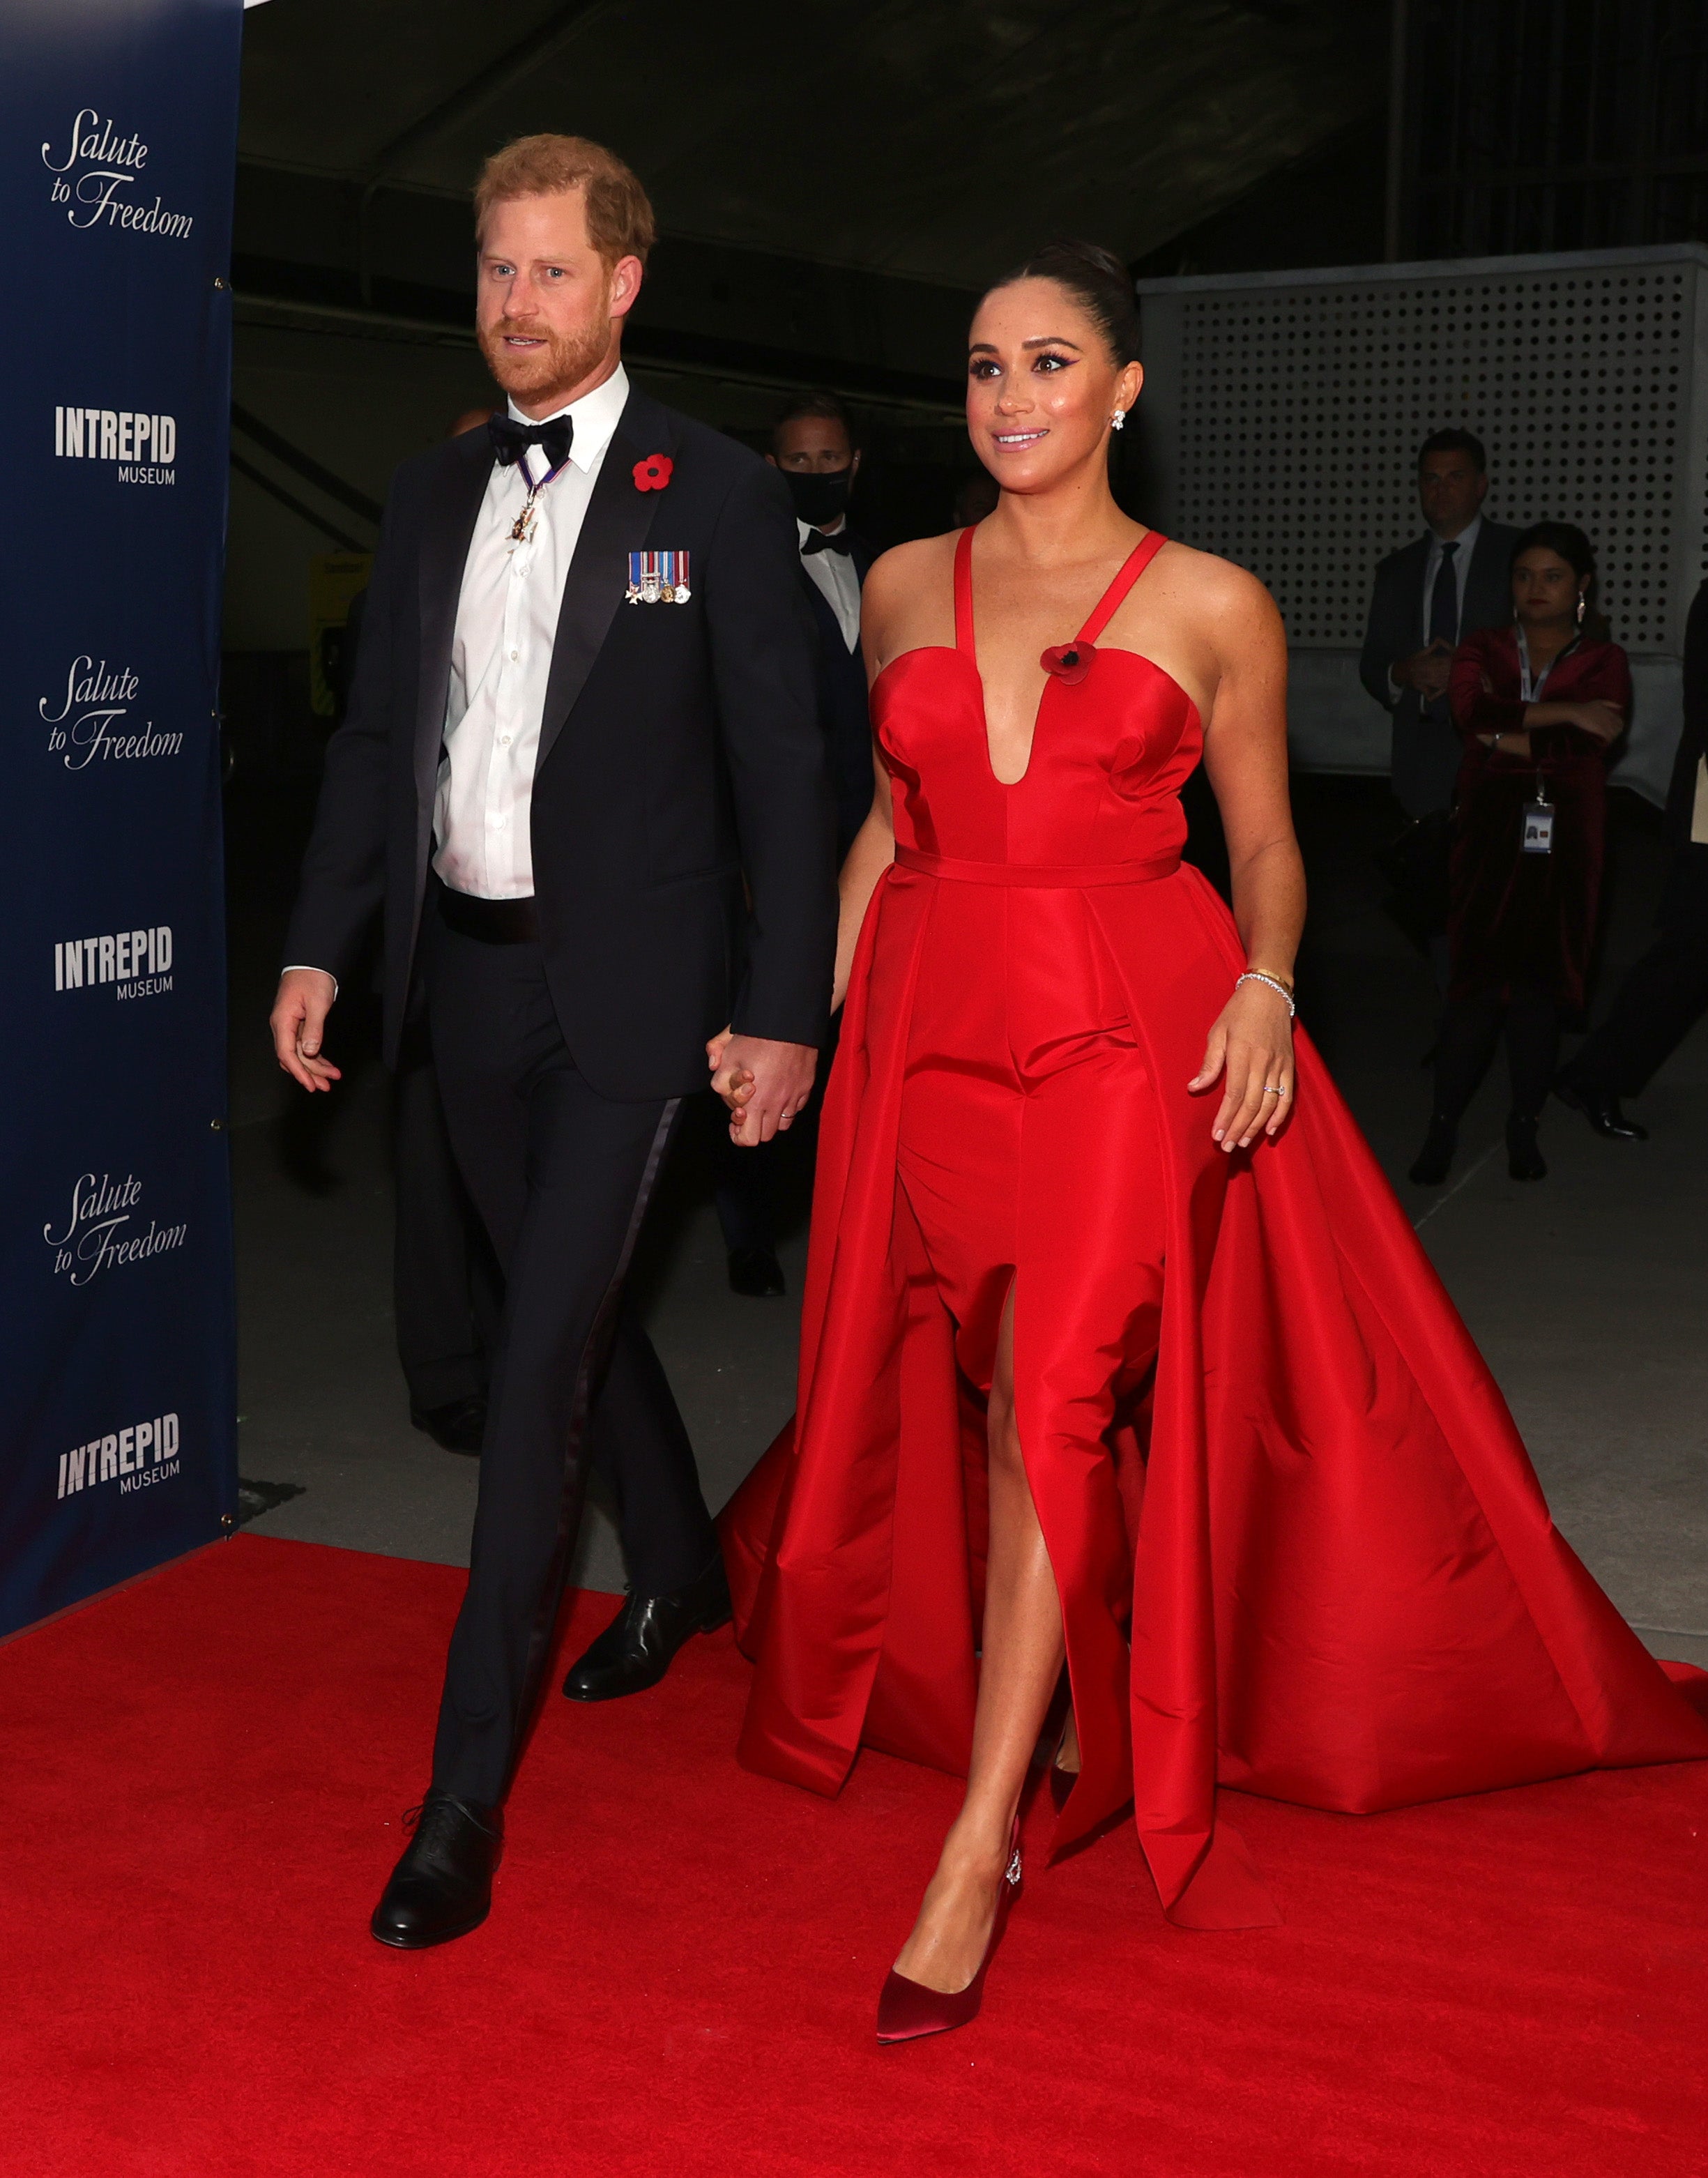 Meghan looked stunning in bright red